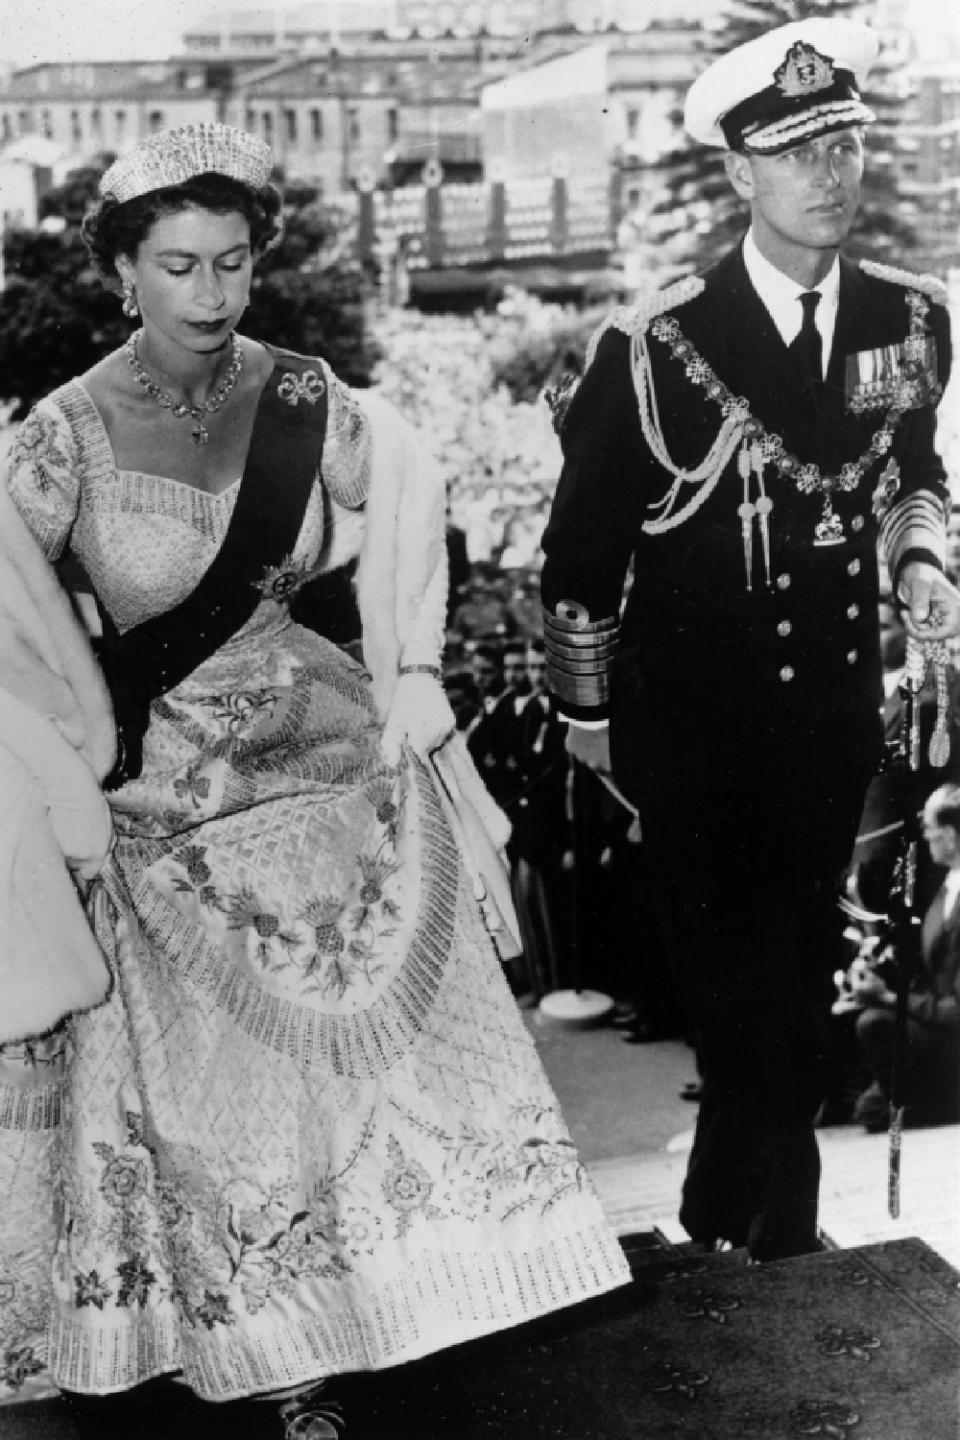 The Queen recycled her Coronation dress multiple times